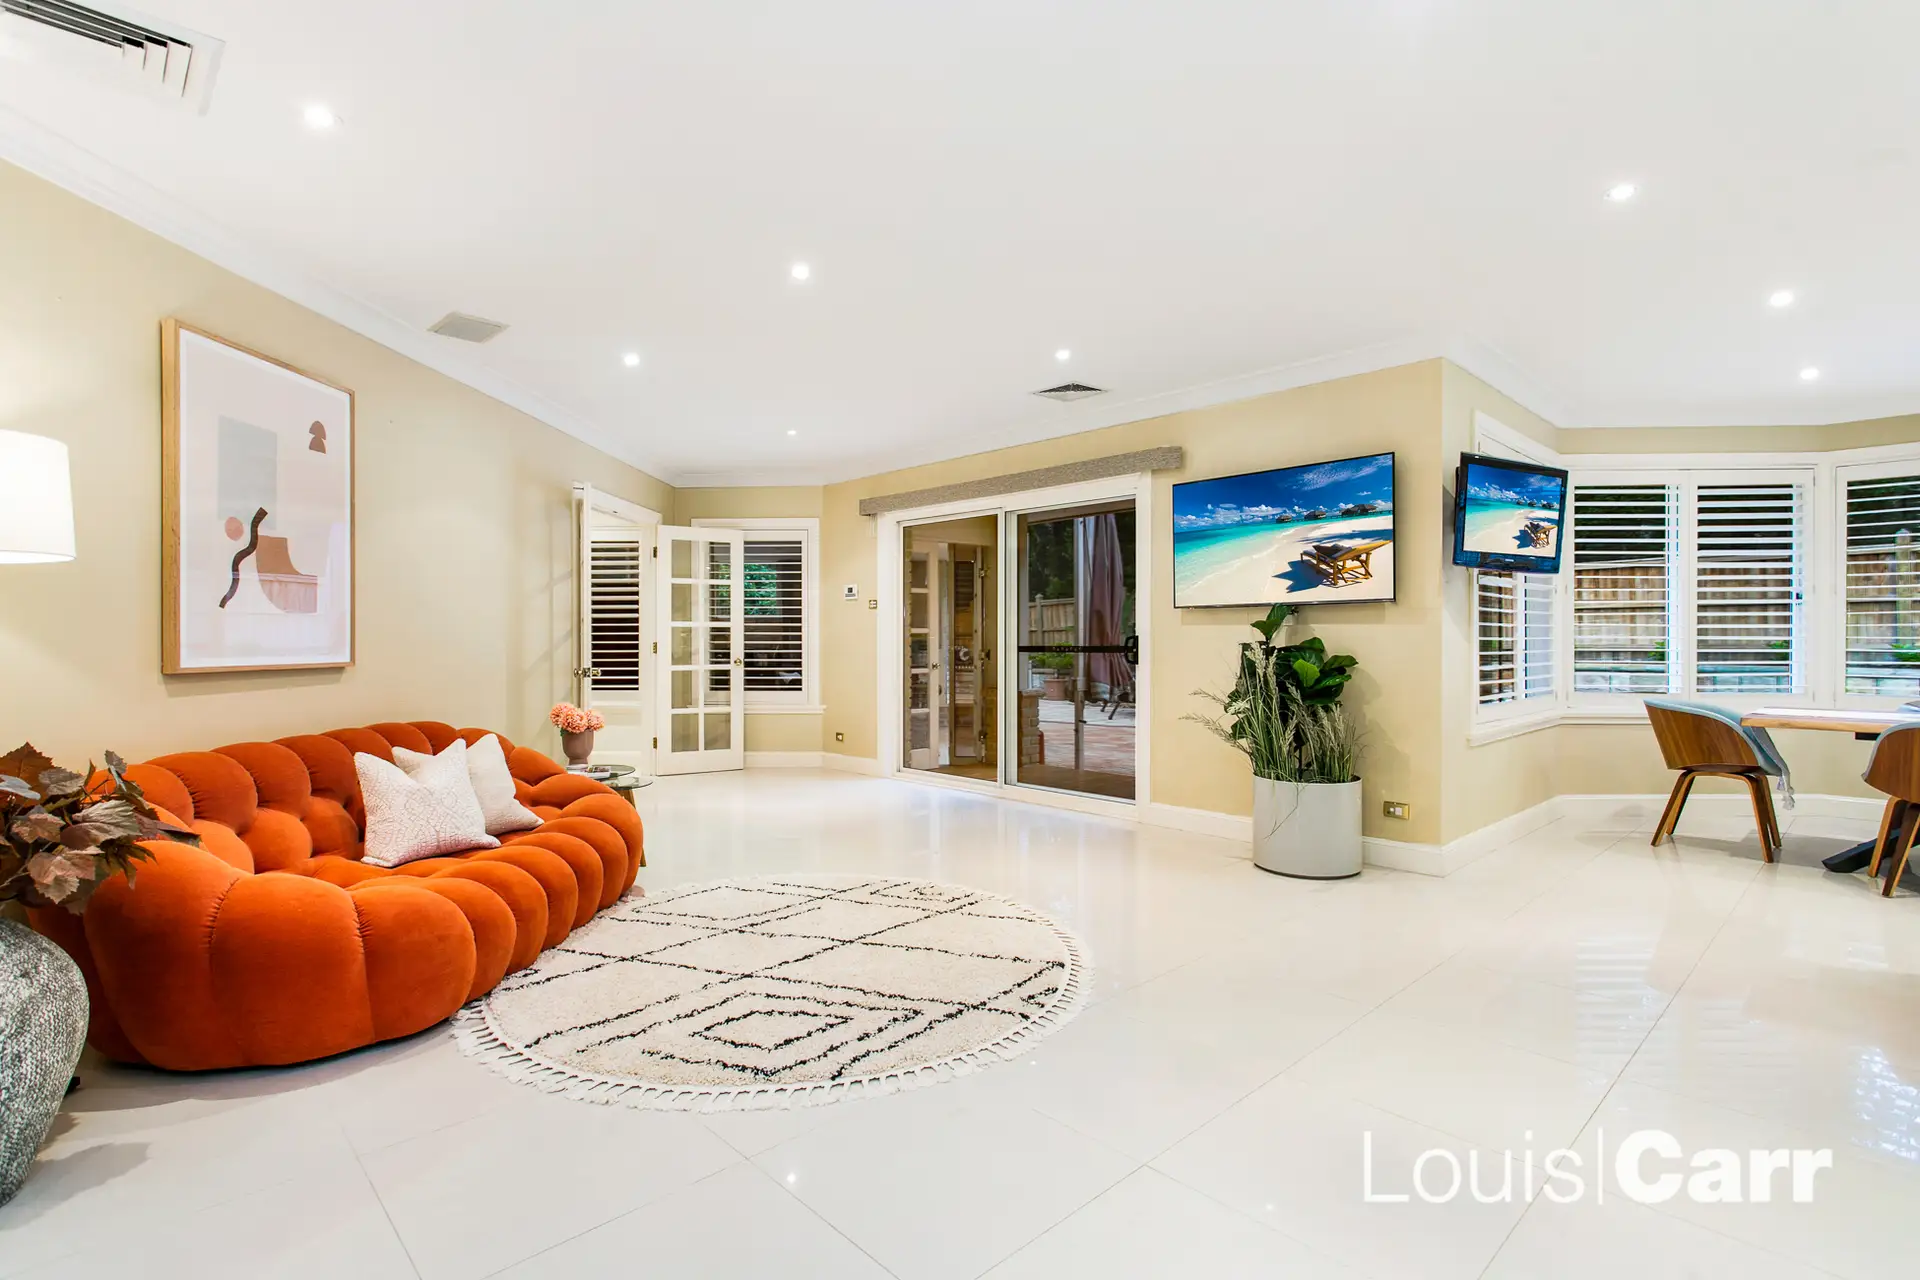 Photo #6: 5 Rodney Place, West Pennant Hills - Sold by Louis Carr Real Estate